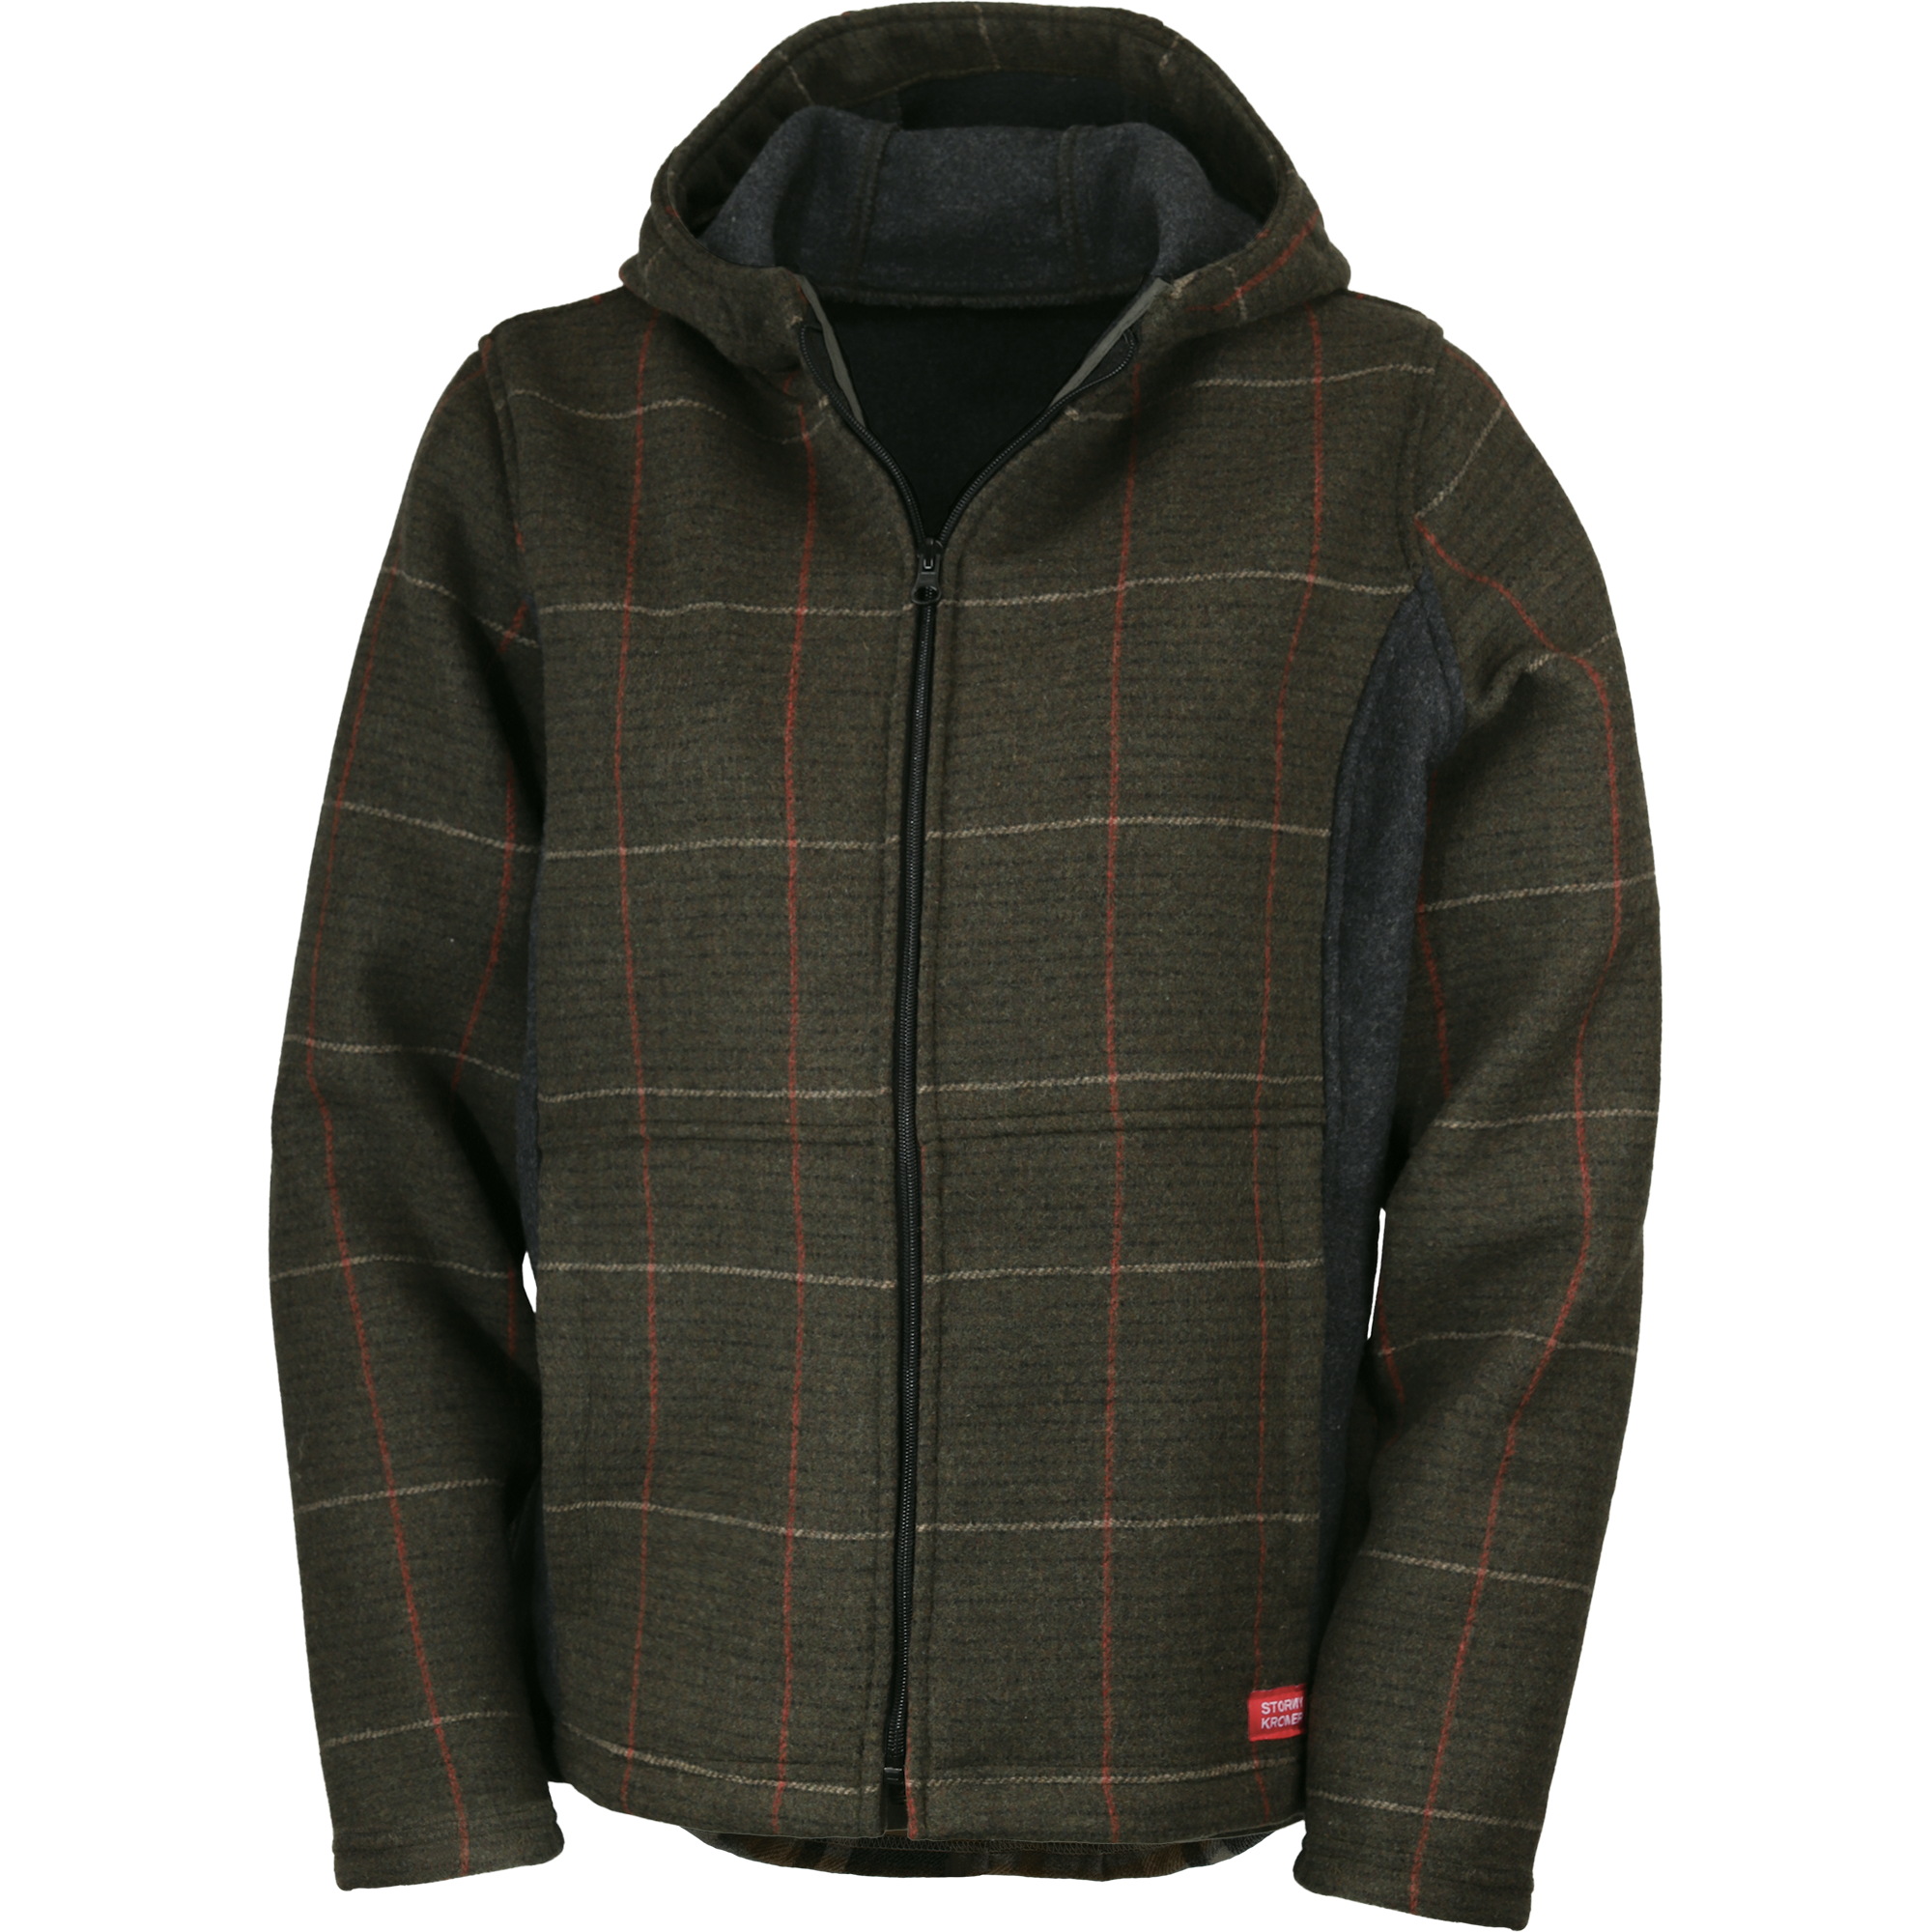 Picture of Stormy Kromer 53470 The Lighthouse Jacket